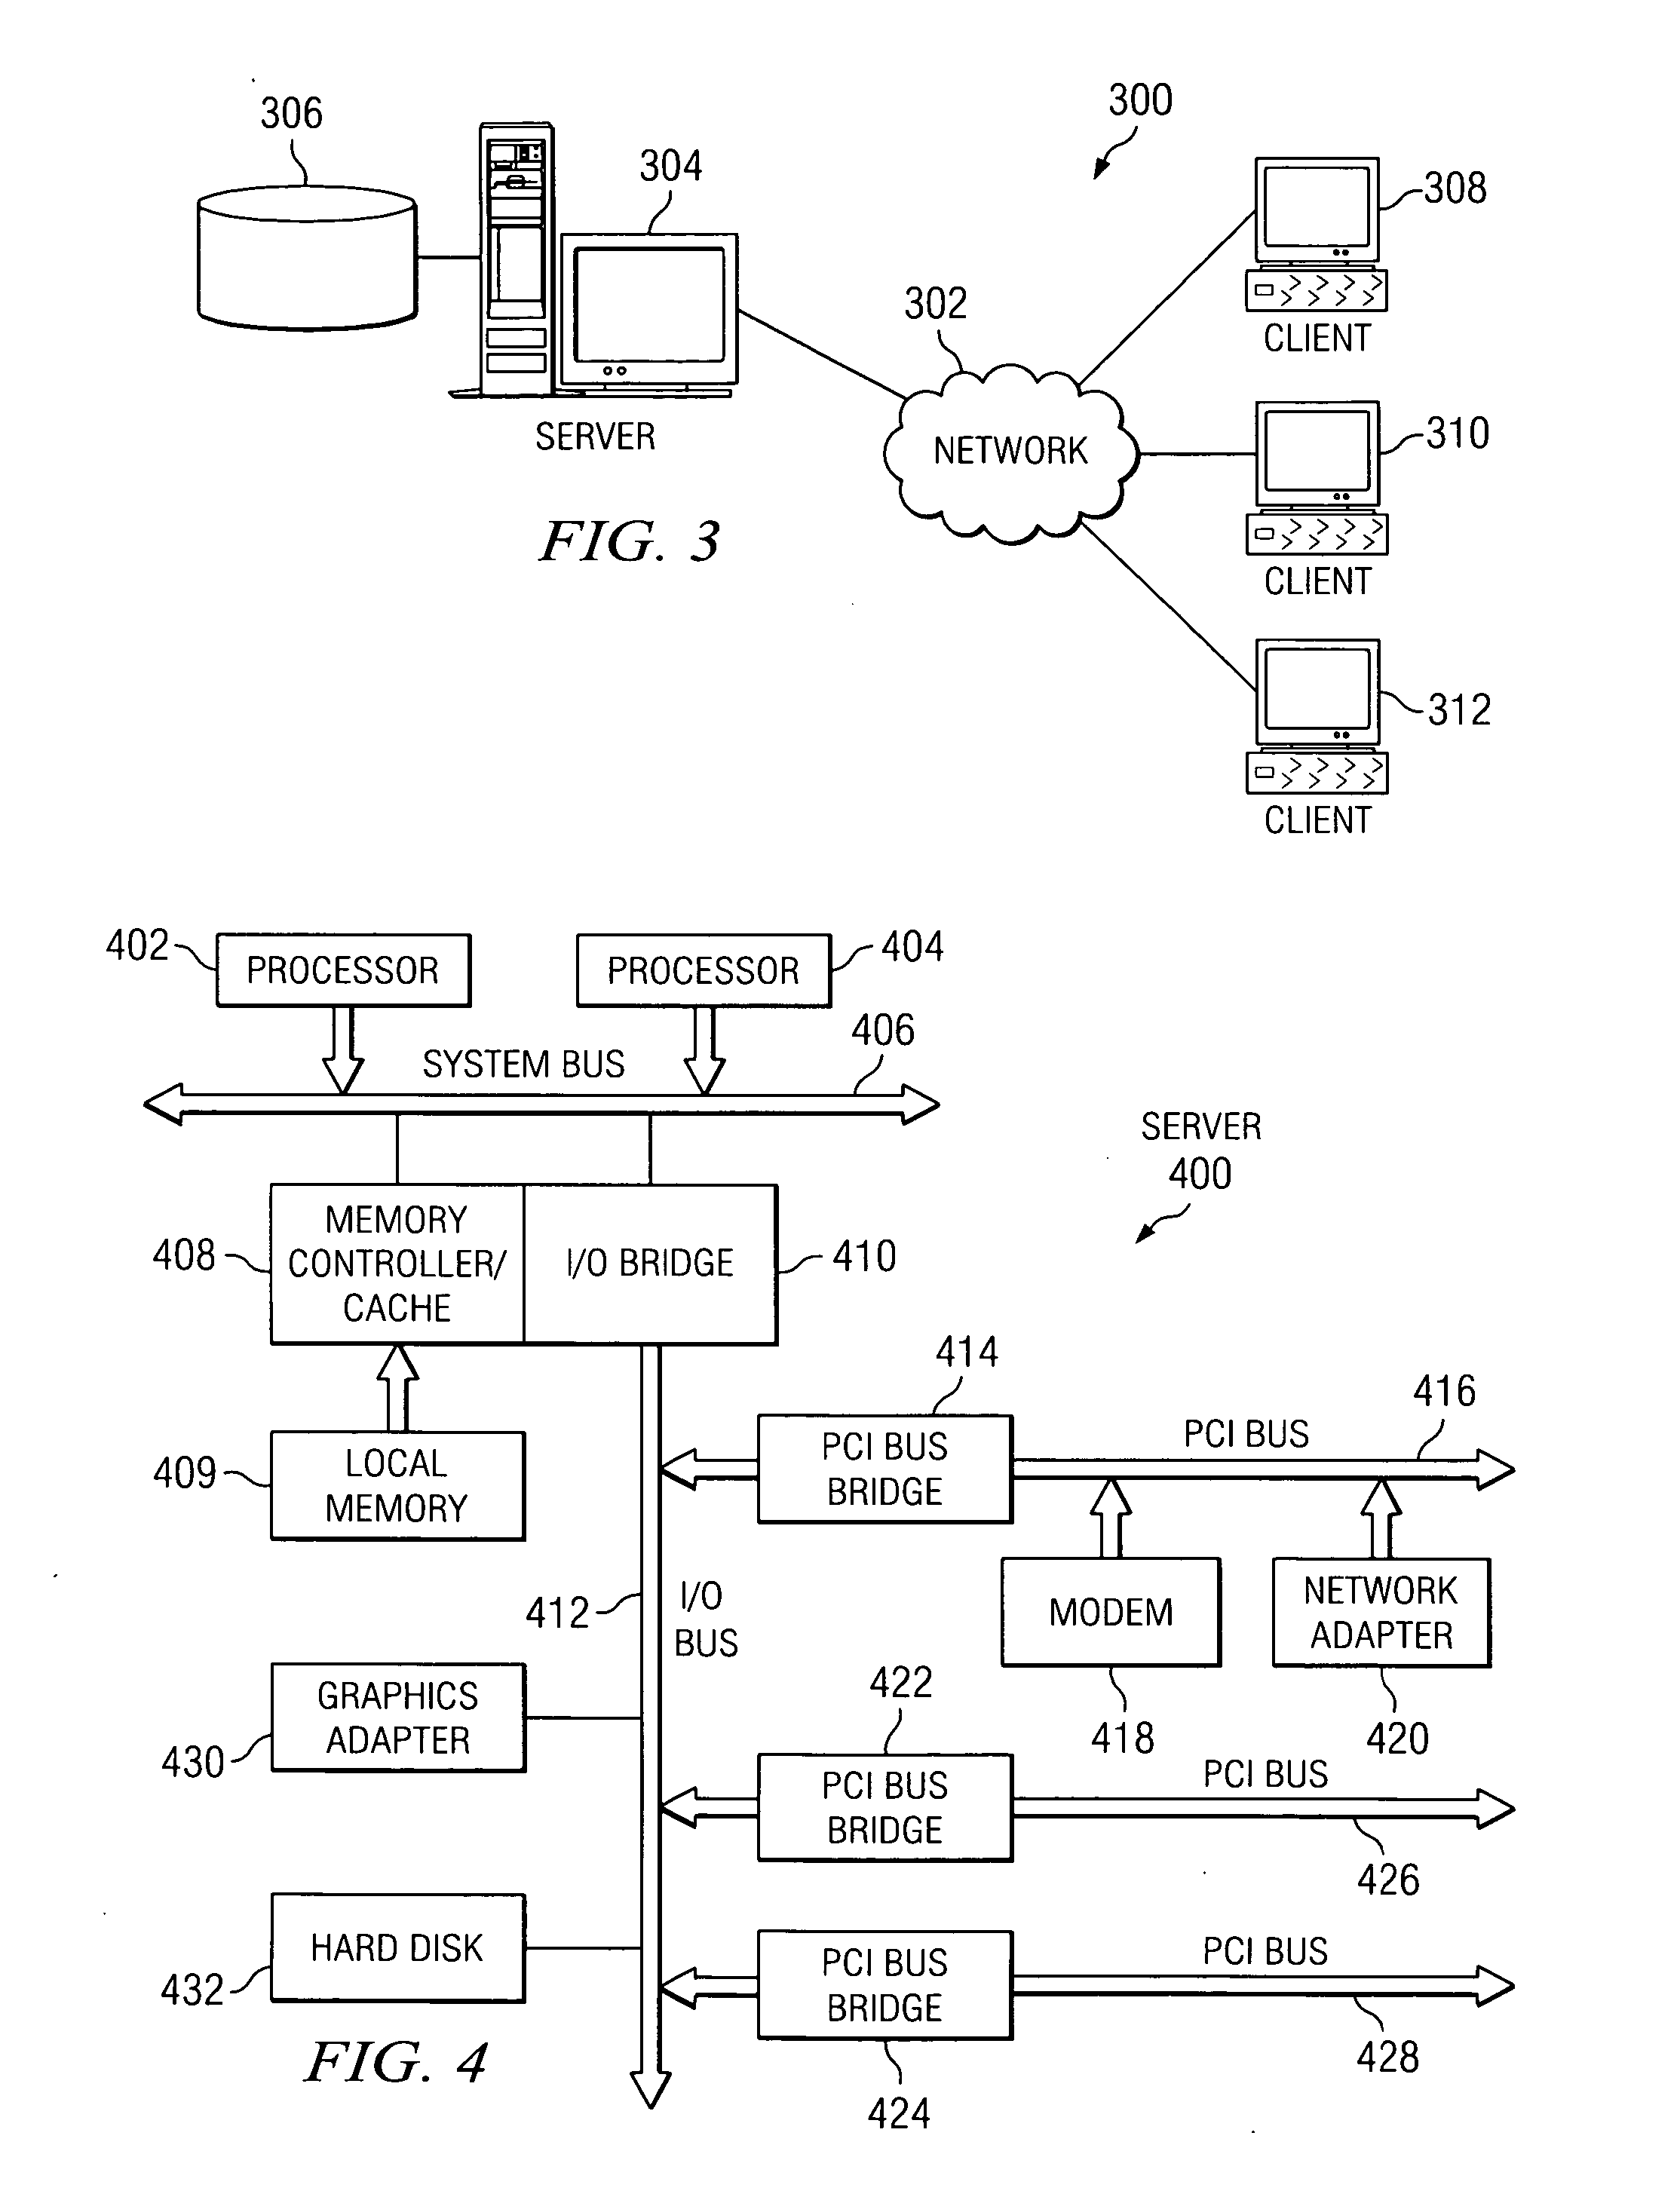 Method and apparatus for data redundancy elimination at the block level